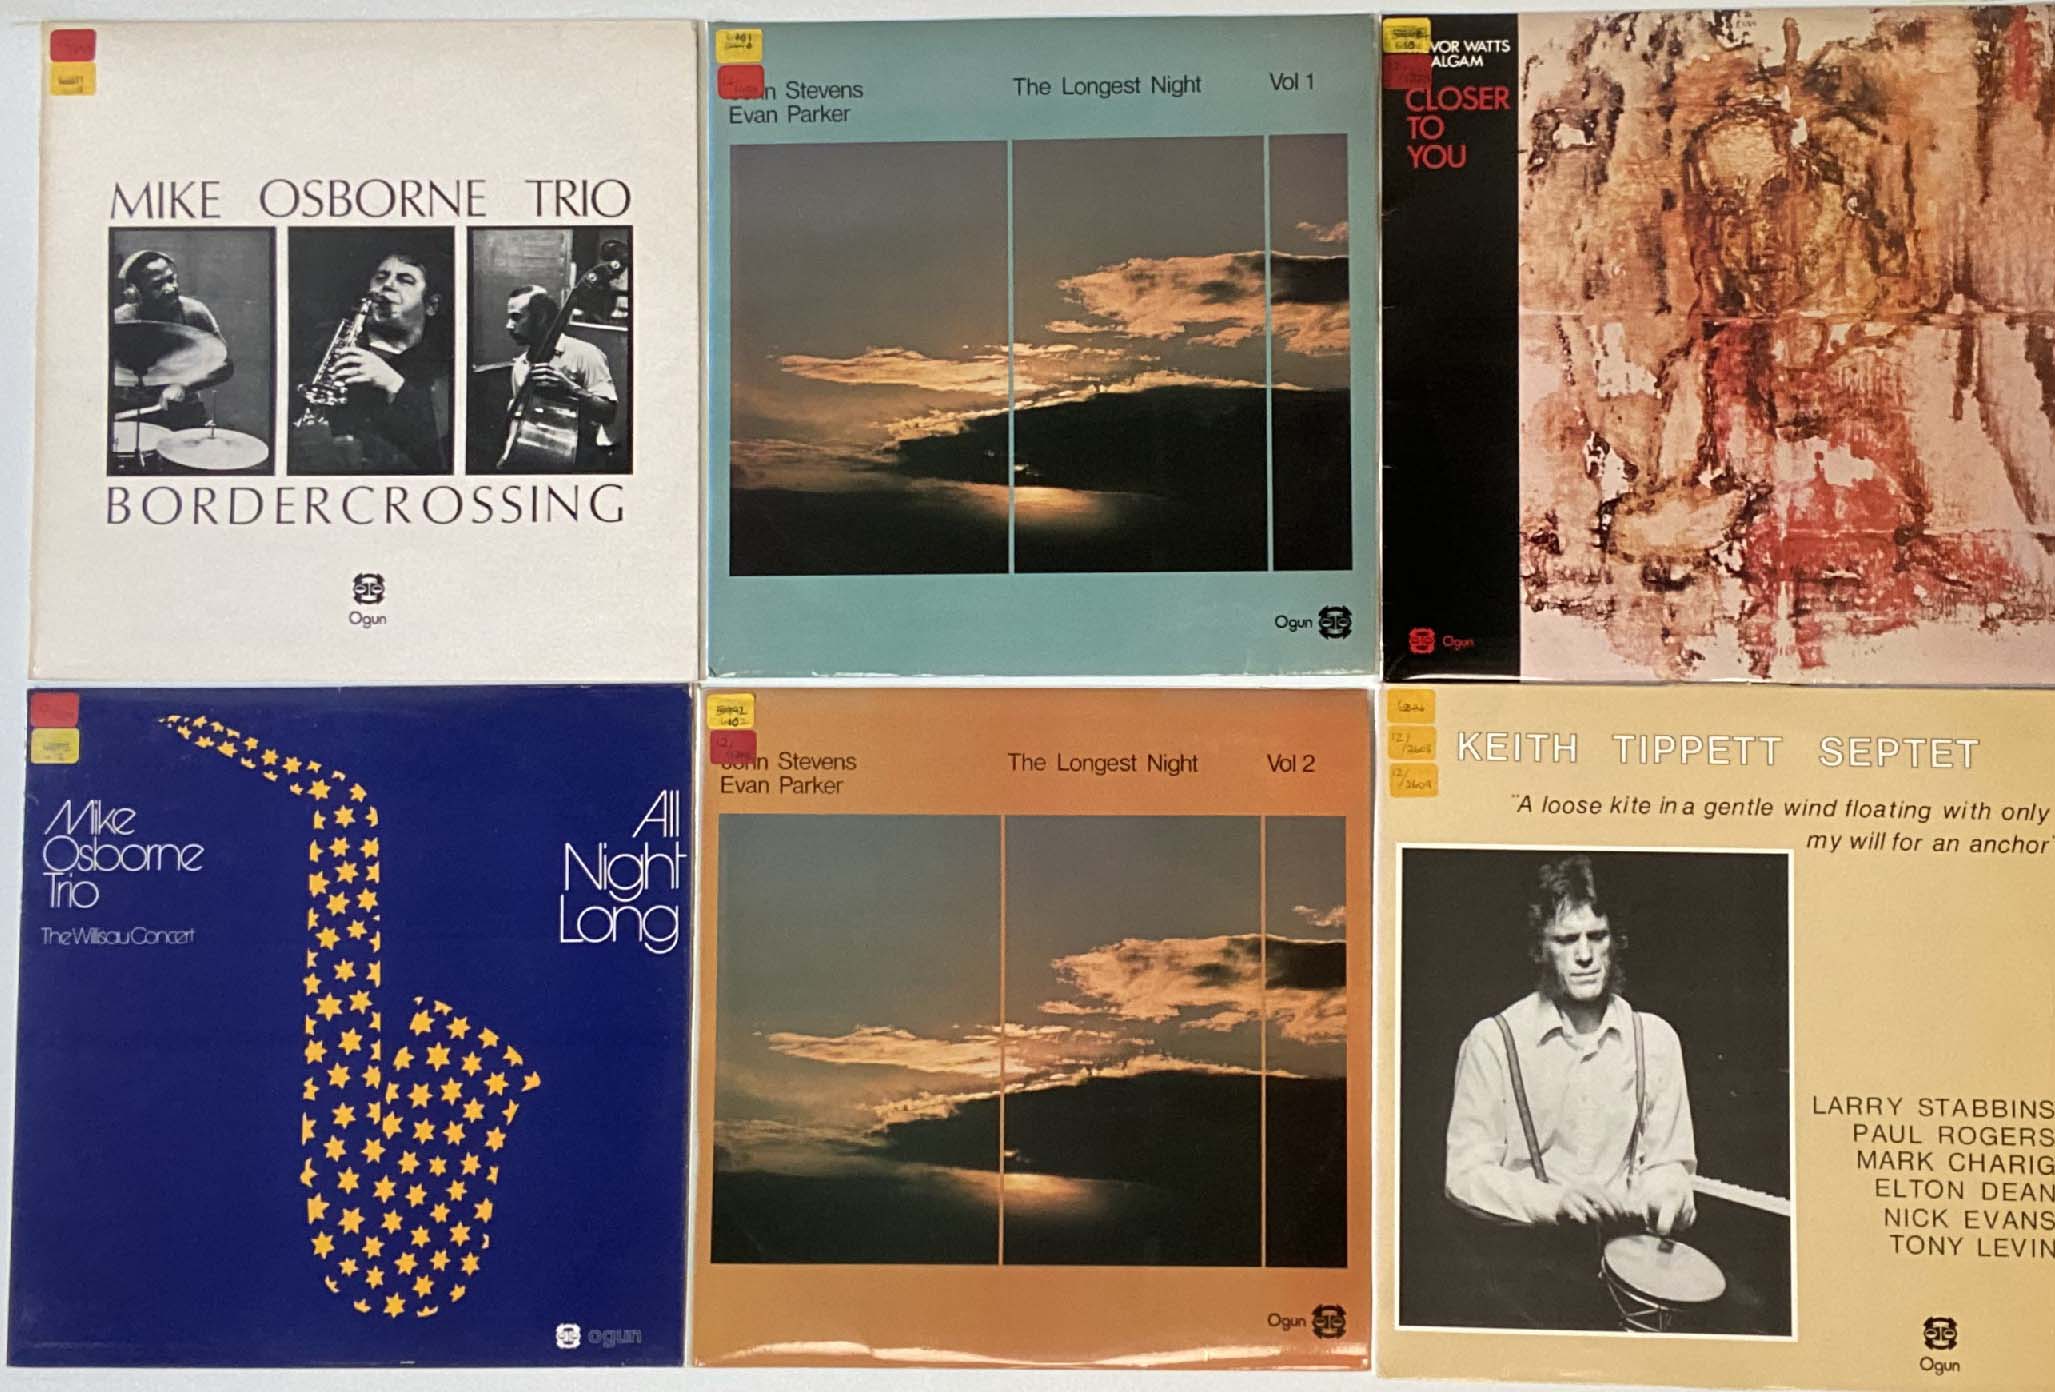 OGUN RECORDS - LPs. More top rarities on Ogun Records with 19 included.